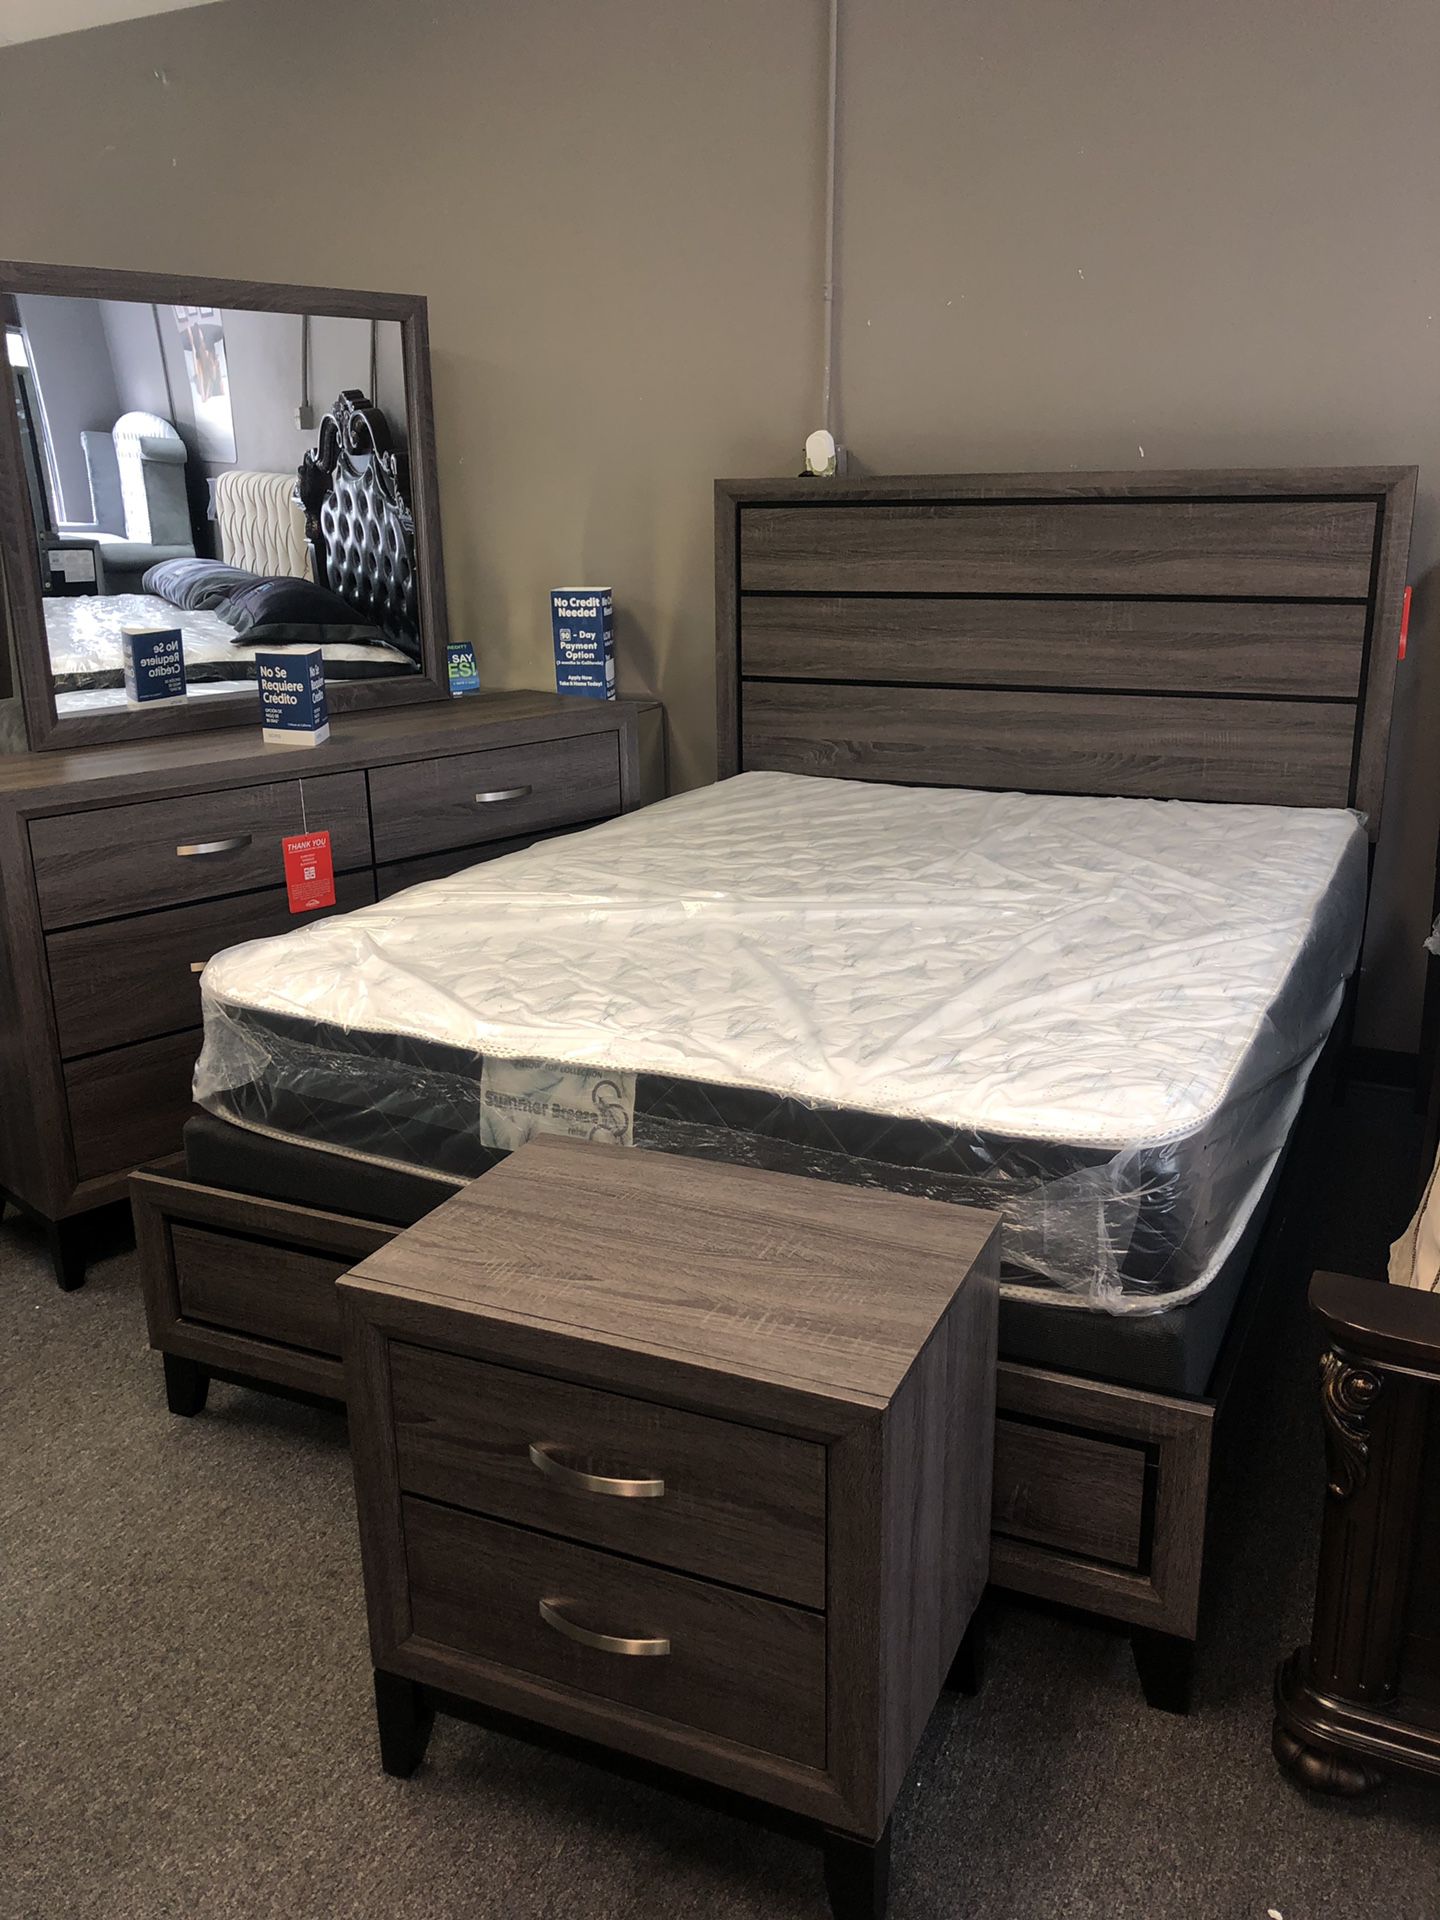 Queen Size Mattress Free Local Delivery